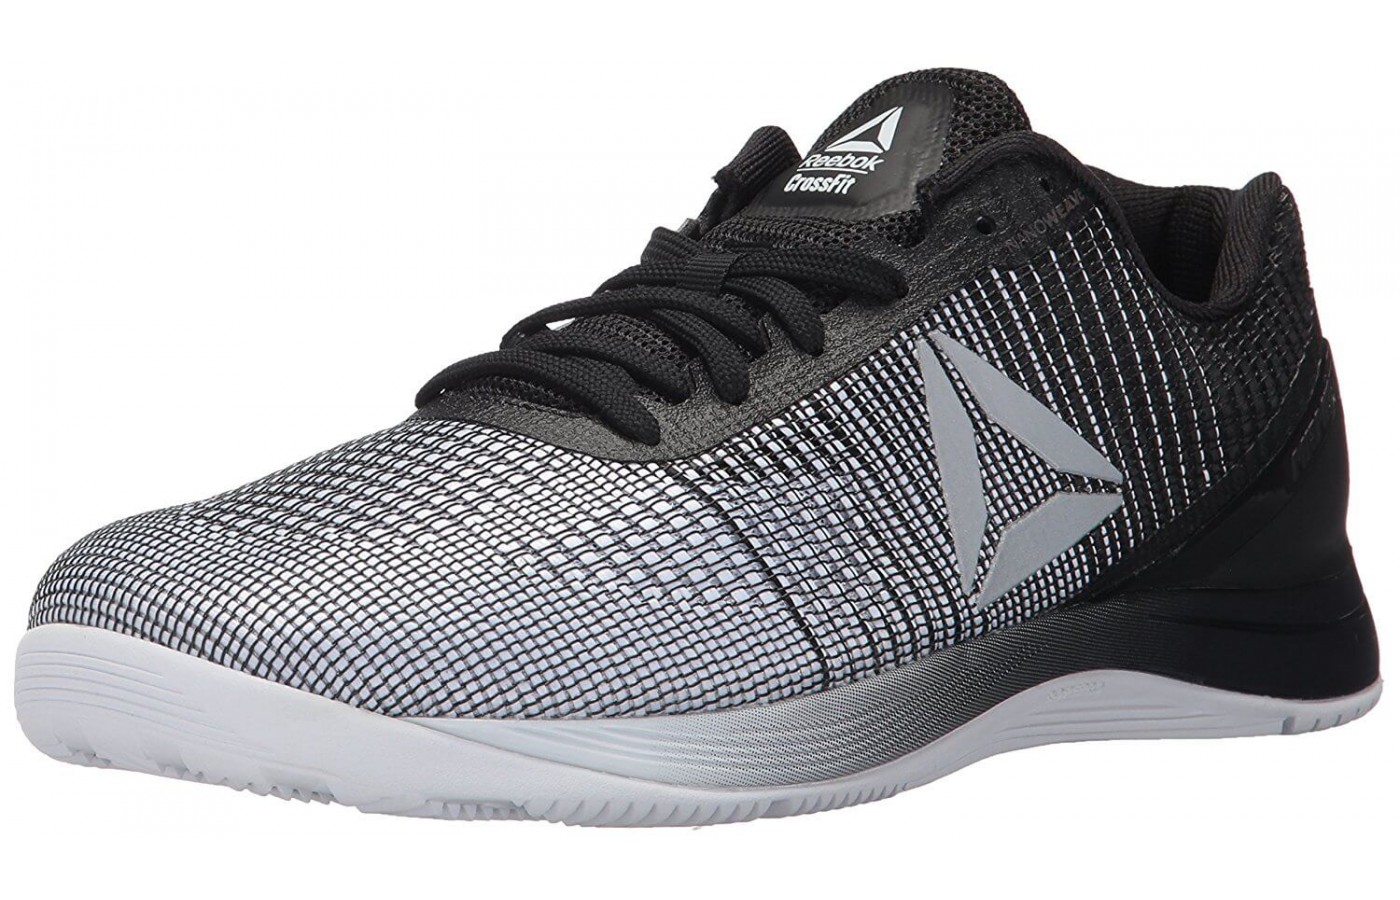 The Reebok Crossfit Nano 7 Weave was designed to fix mistakes in the original design.